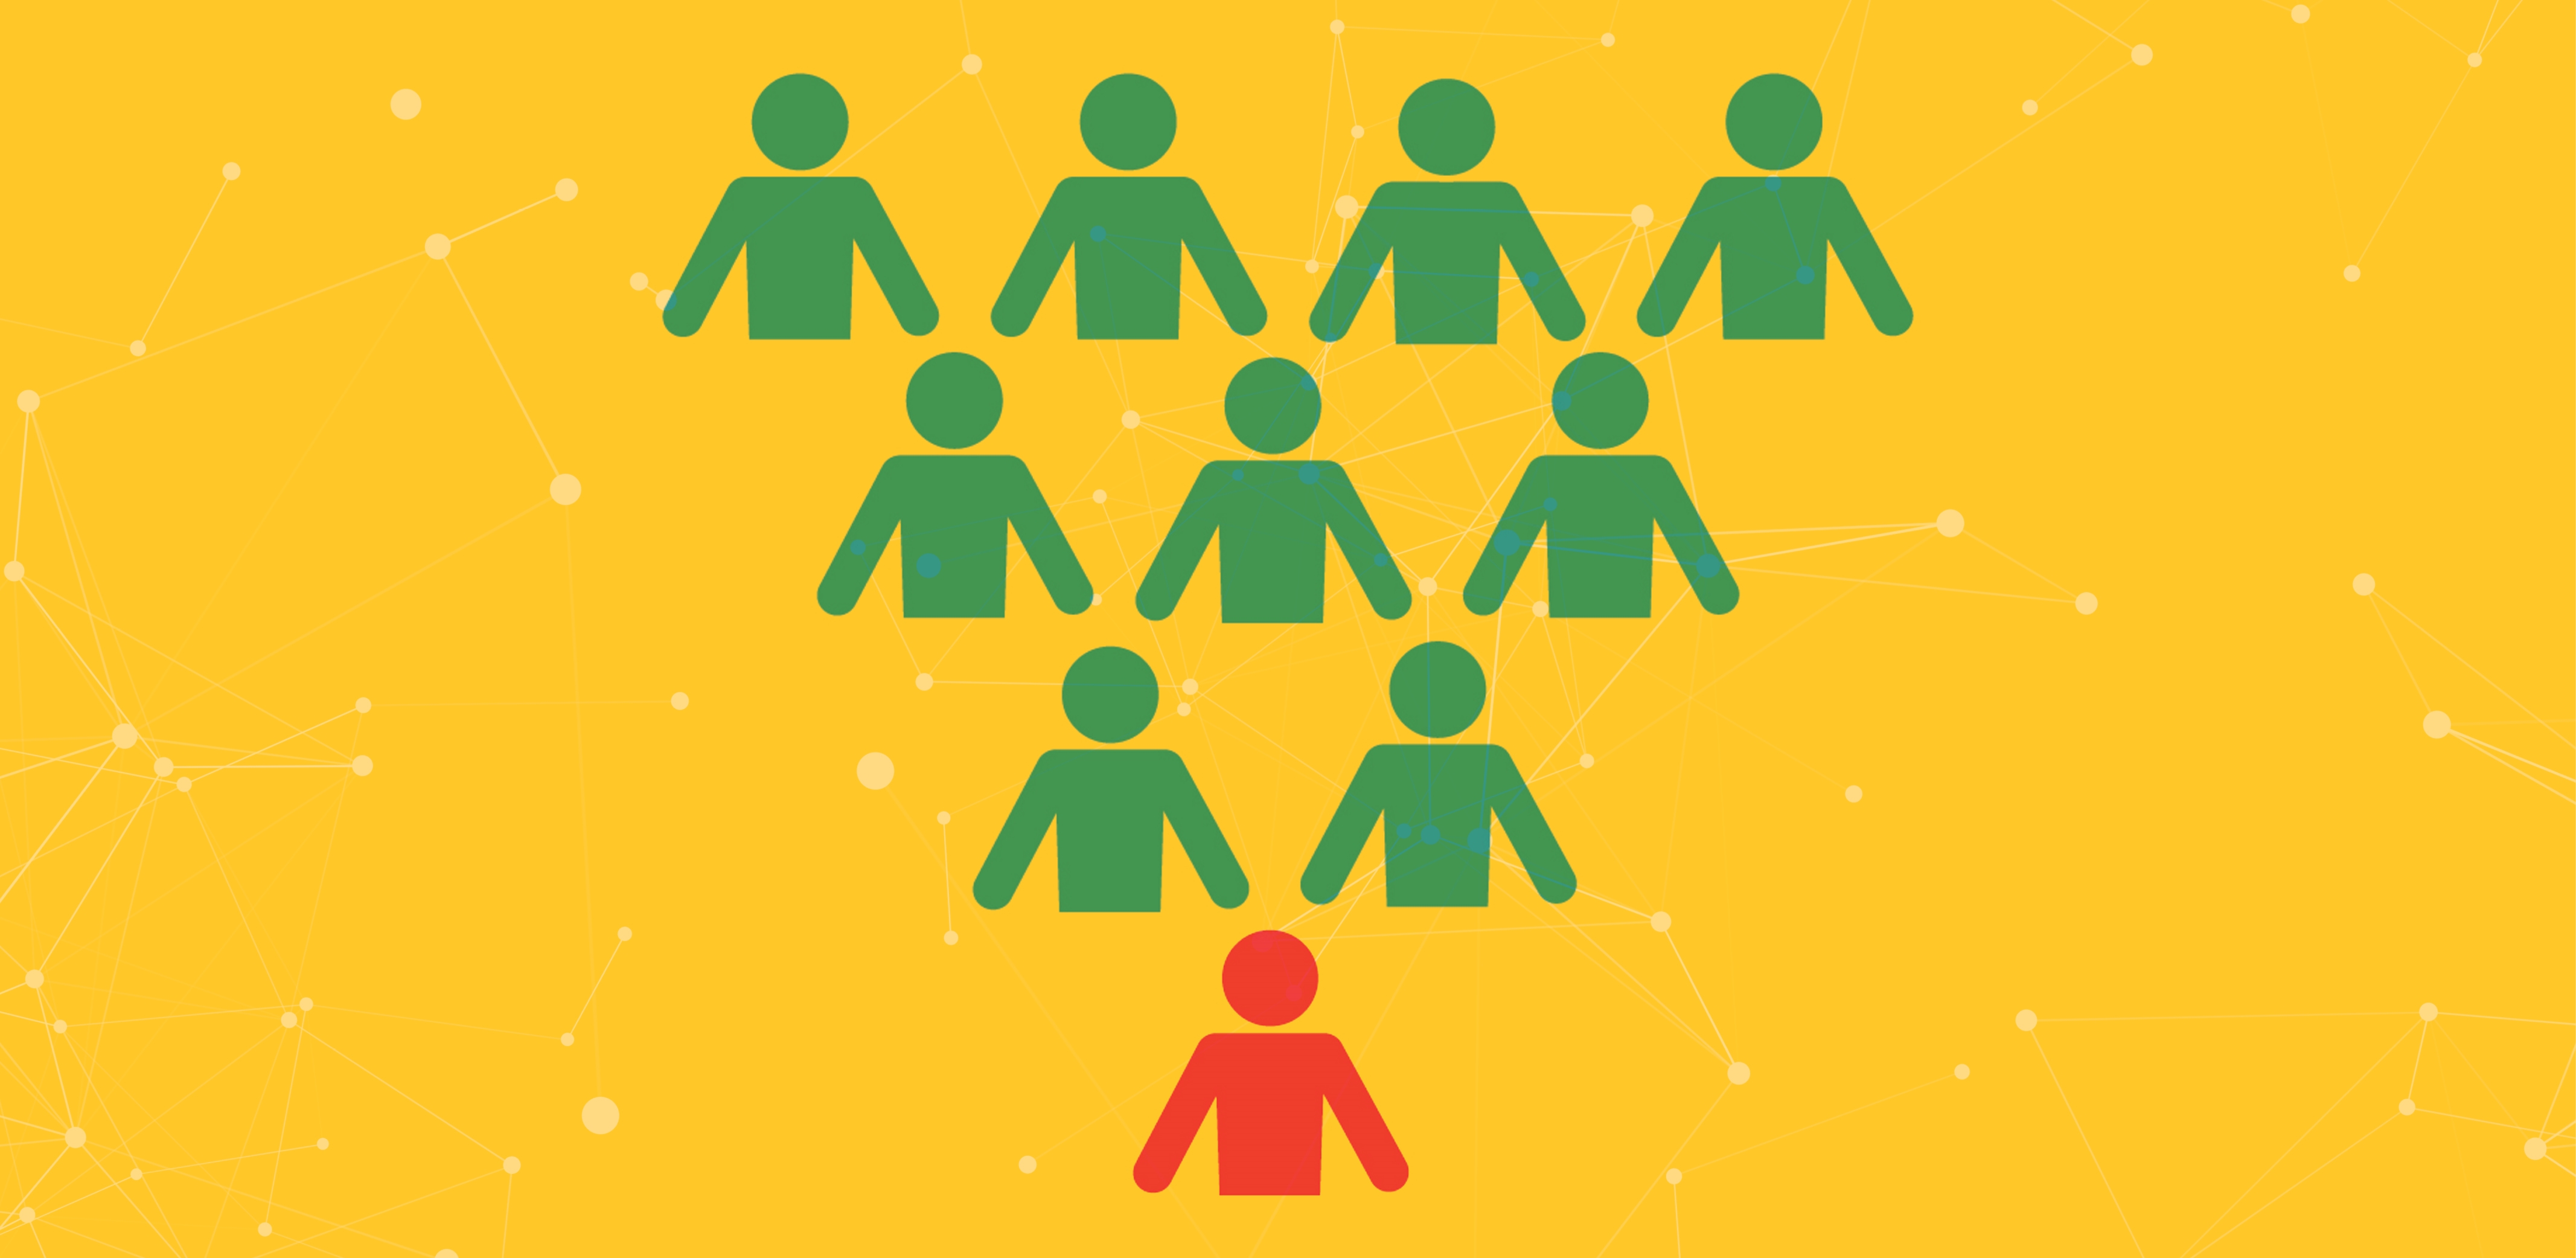 Illustration of people arranged in a triangle pointed downwards. The person at the point is colored orange and others are green.